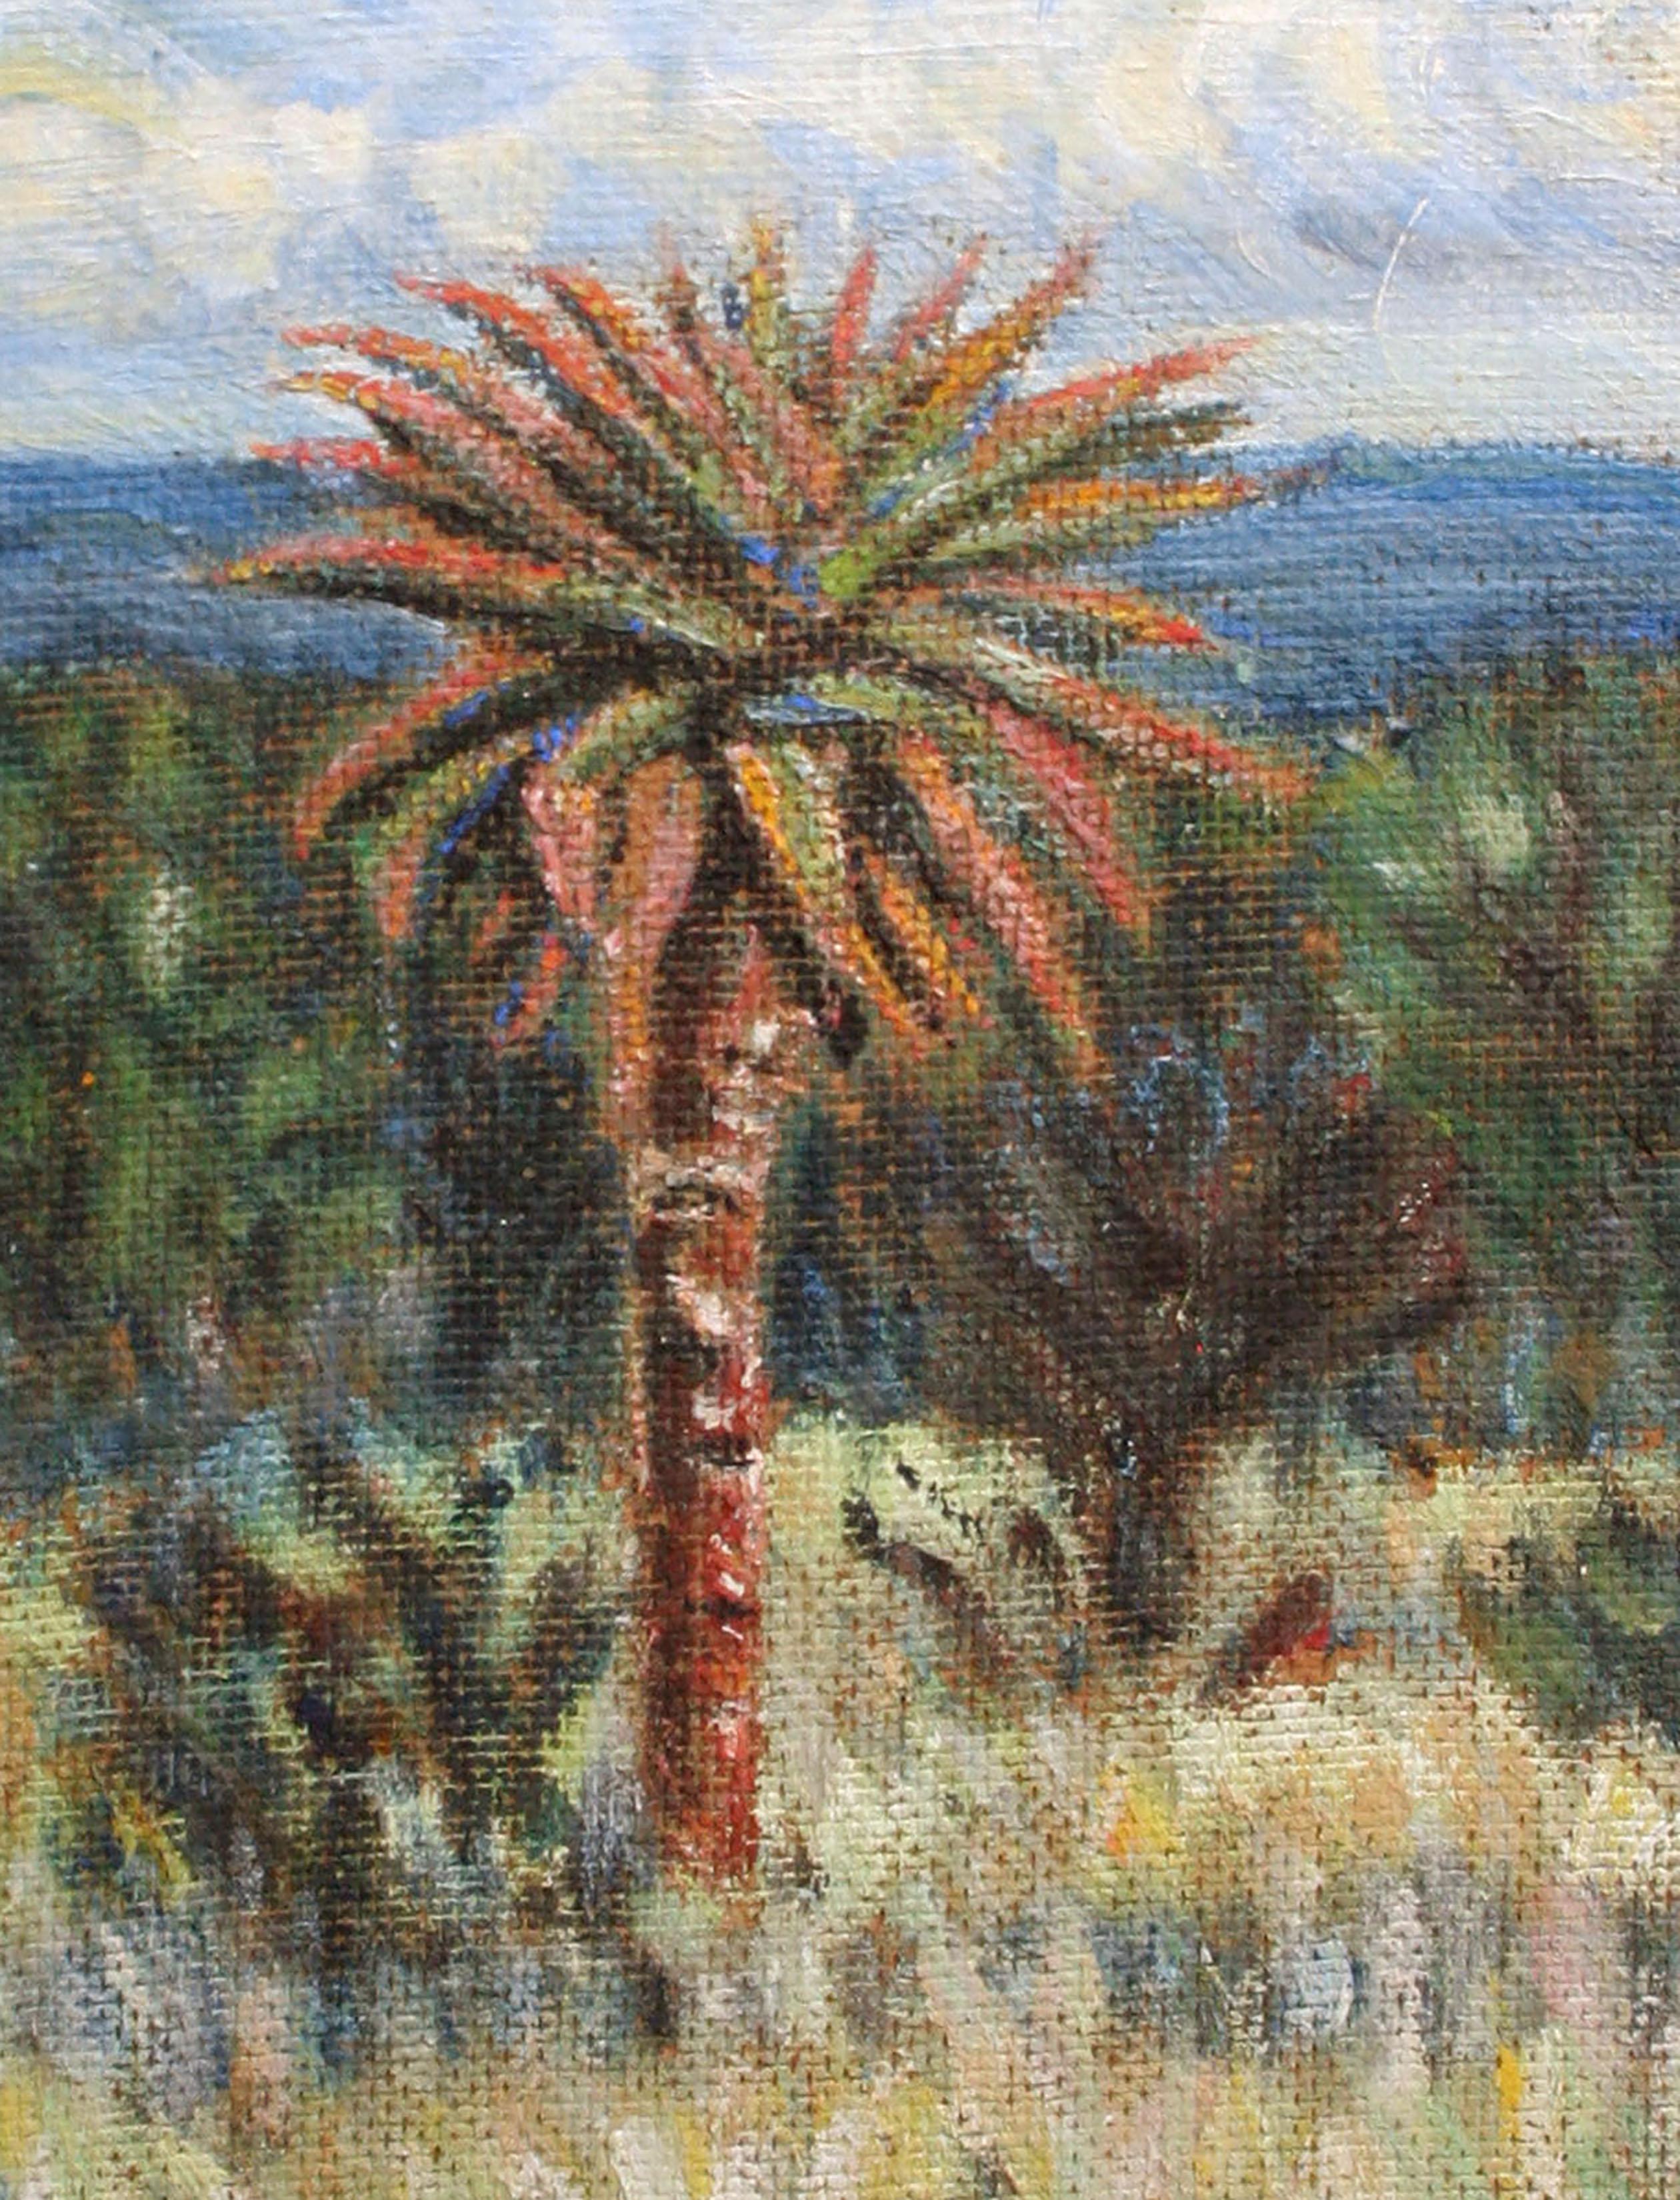 Mid Century Palm Springs Desert Landscape - Painting by Unknown